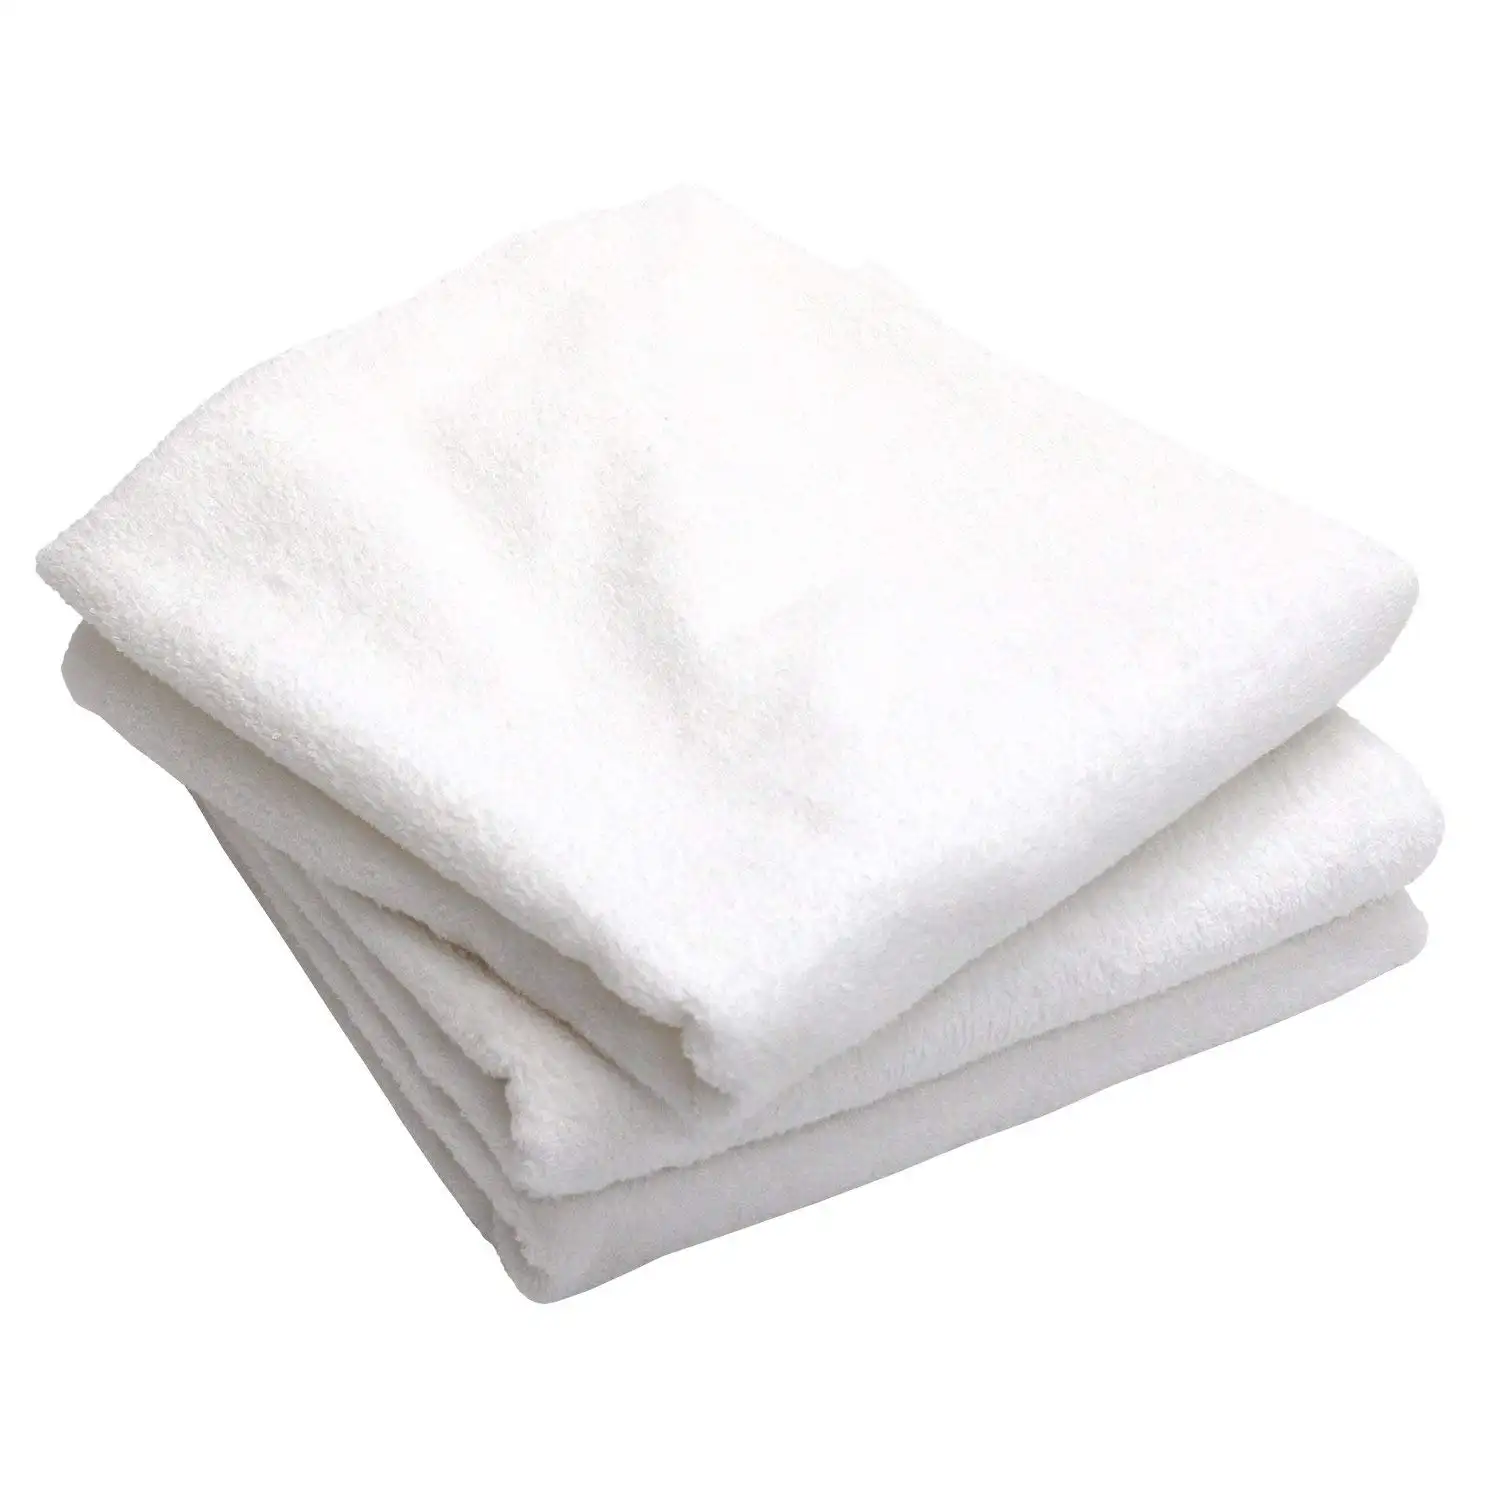 [OEM Customize] Cotton 100% Bath Towel Made in Japan 23*47in 350GSM Customize Color 60*120cm Bath Linens Quick Dry Light Weight